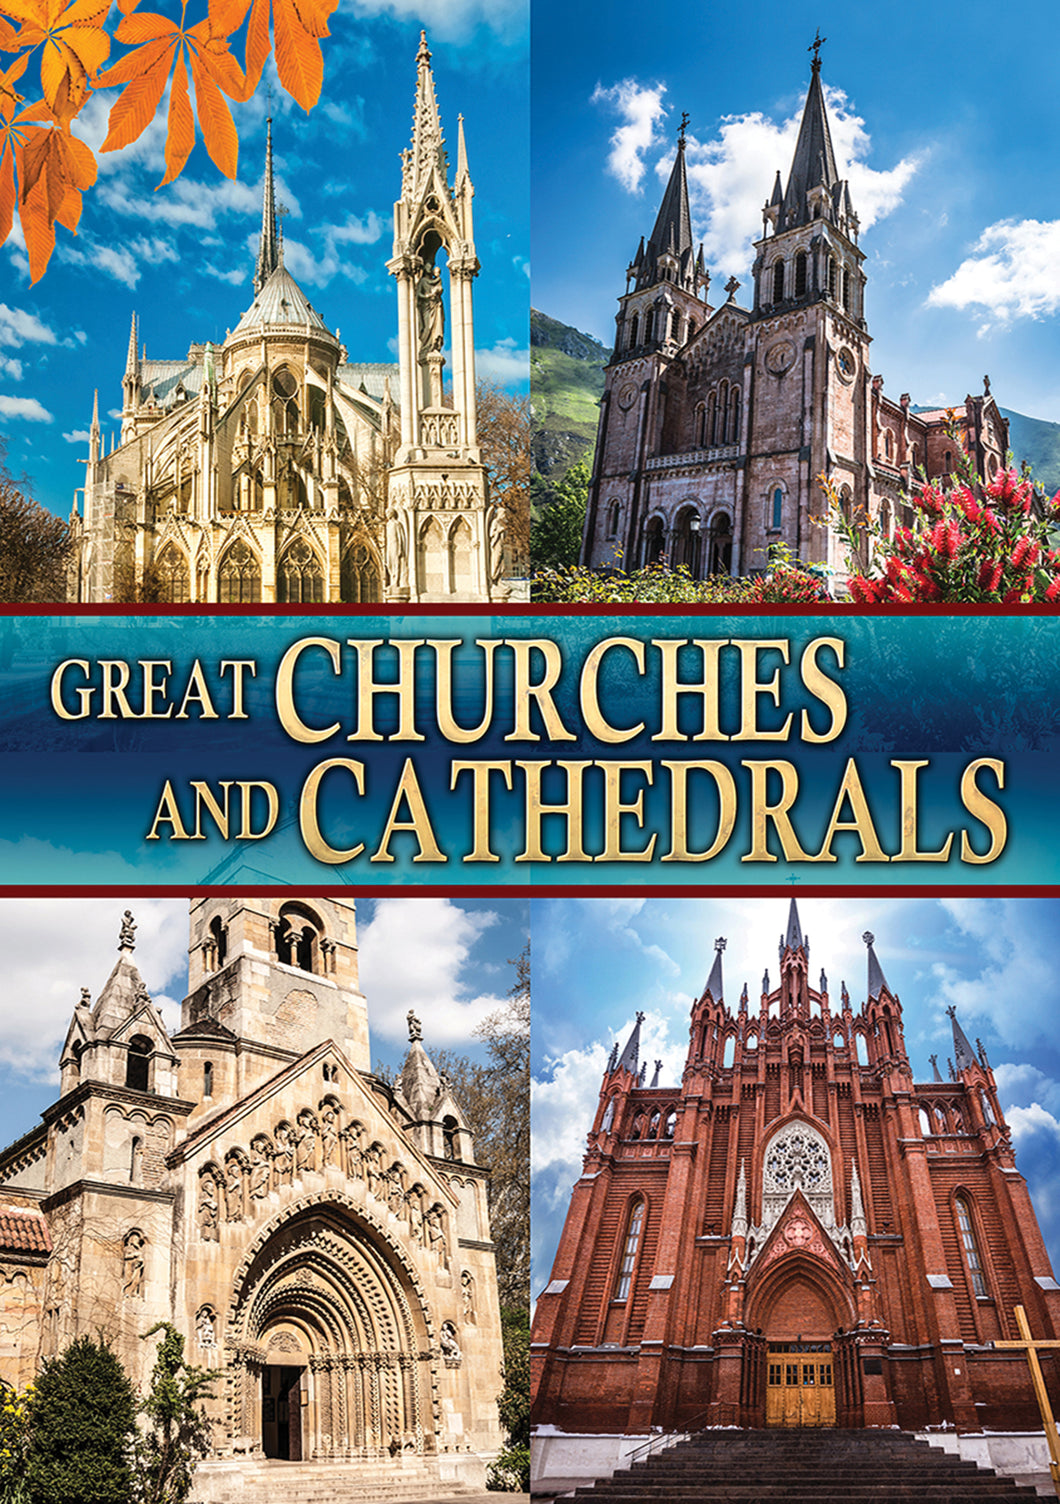 Great Churches And Cathedrals (DVD)